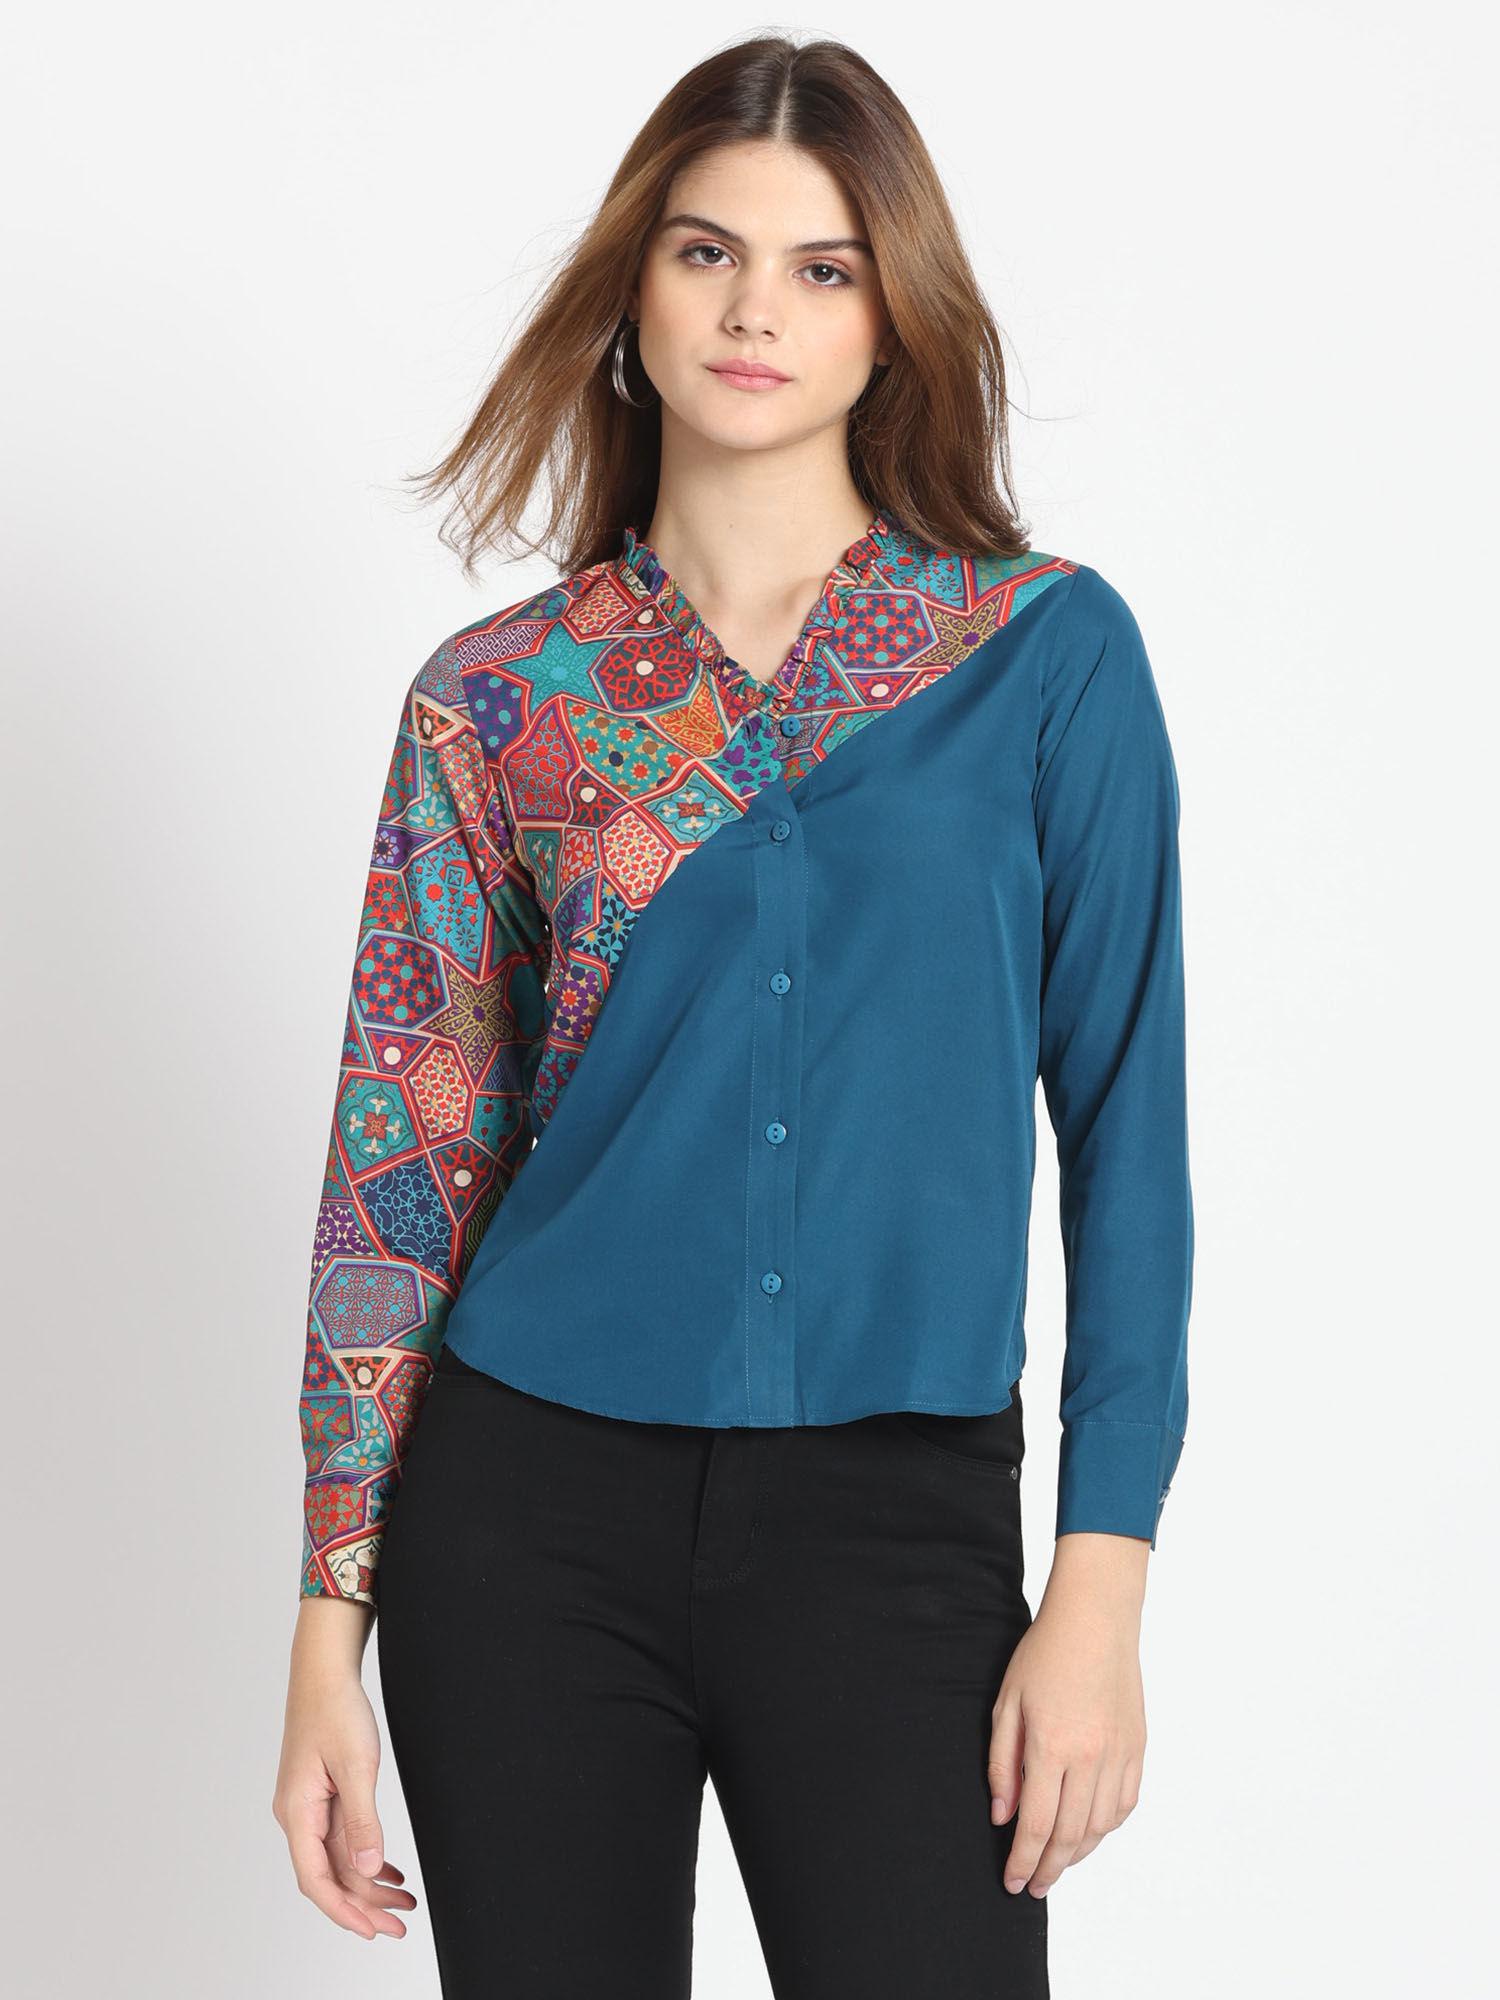 teal printed long sleeves casual shirts for women